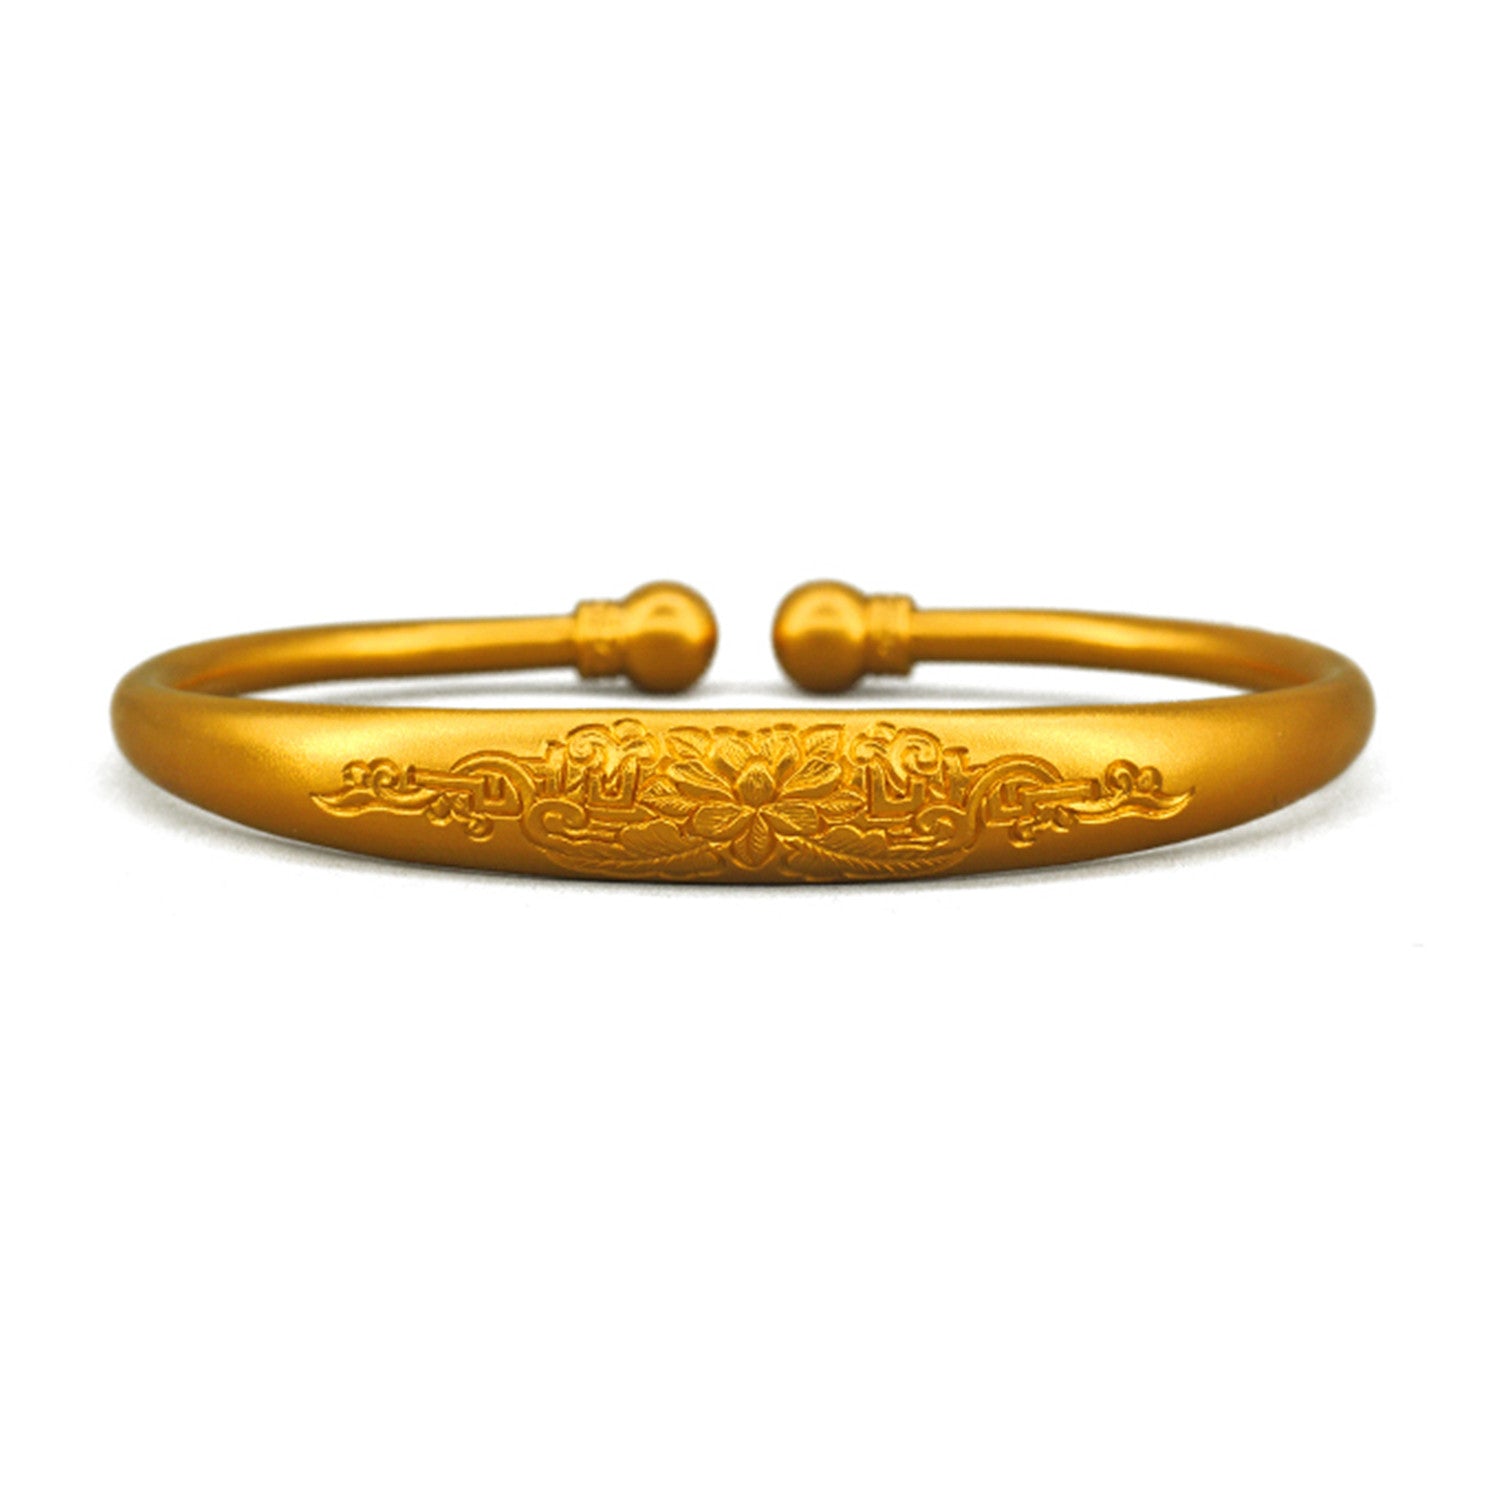 EVECOCO Full Gold Bracelet Hand Forging,Ancient Simple Pattern,40g